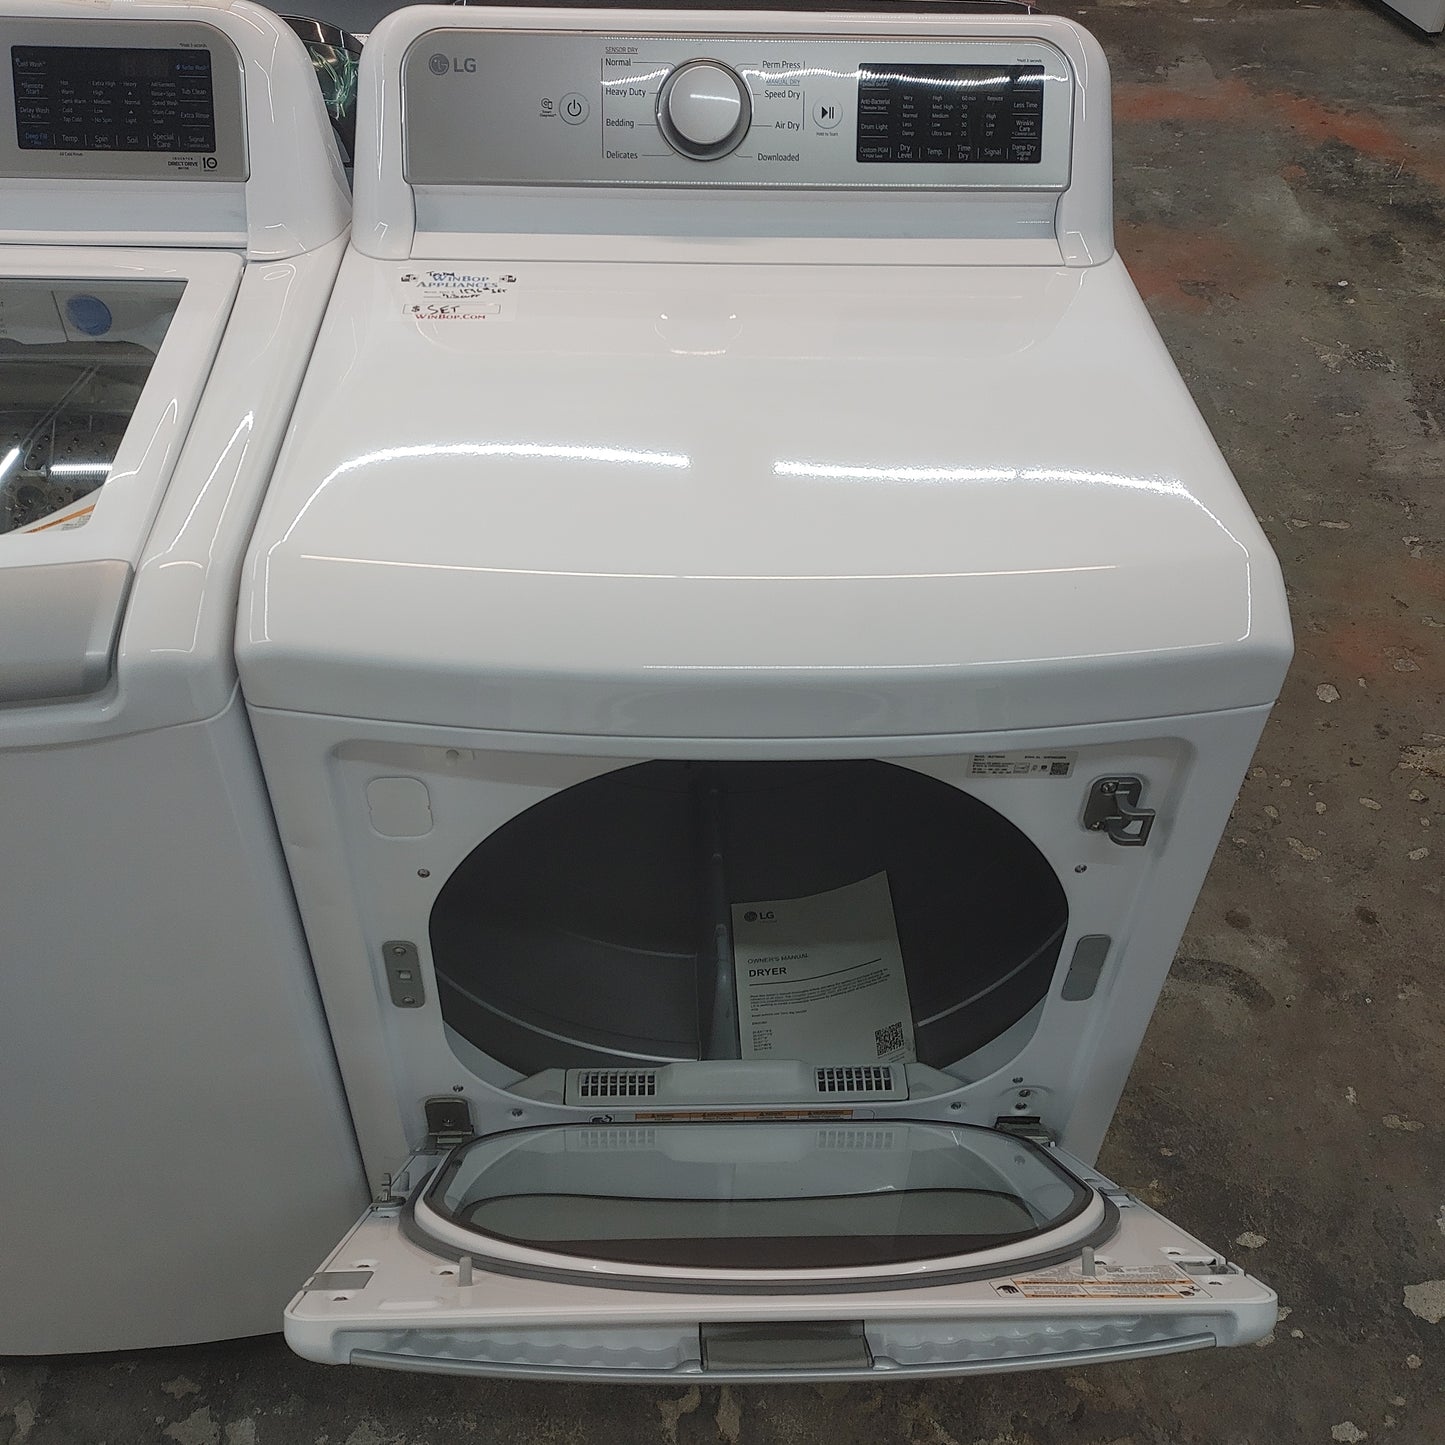 New LG 5.3 Cubic Ft Top Load Washer and 7.4 Cubic Ft Electric Dryer with WiFi Smart Remote